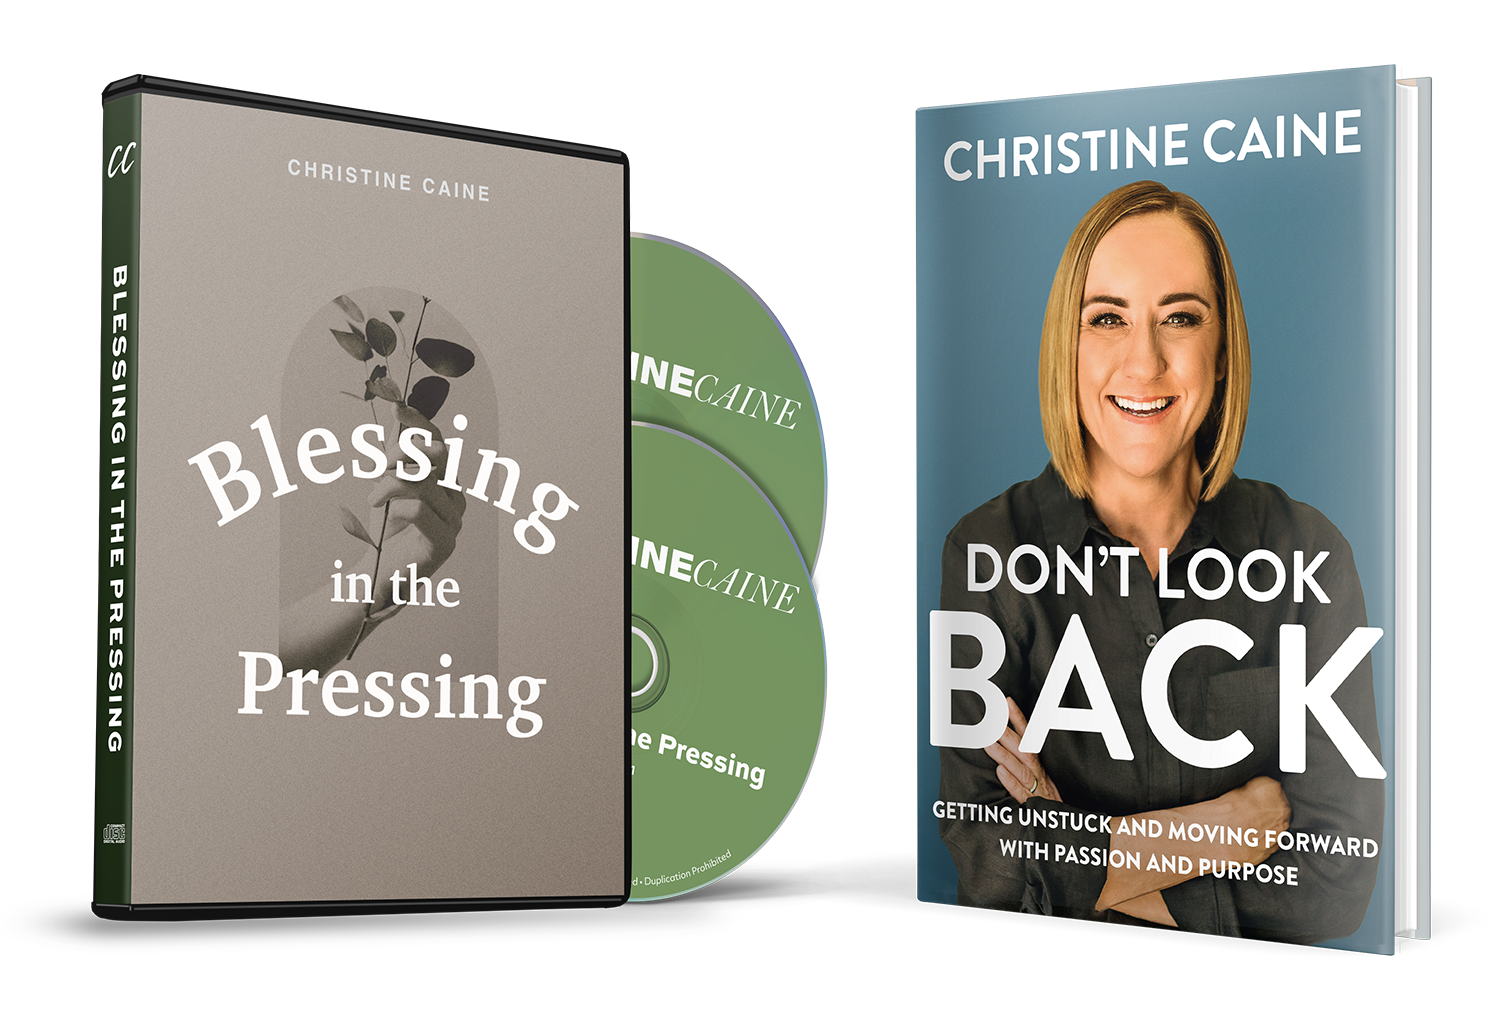 Blessing in the Pressing & Don't Look Back by Christine Caine by TBN